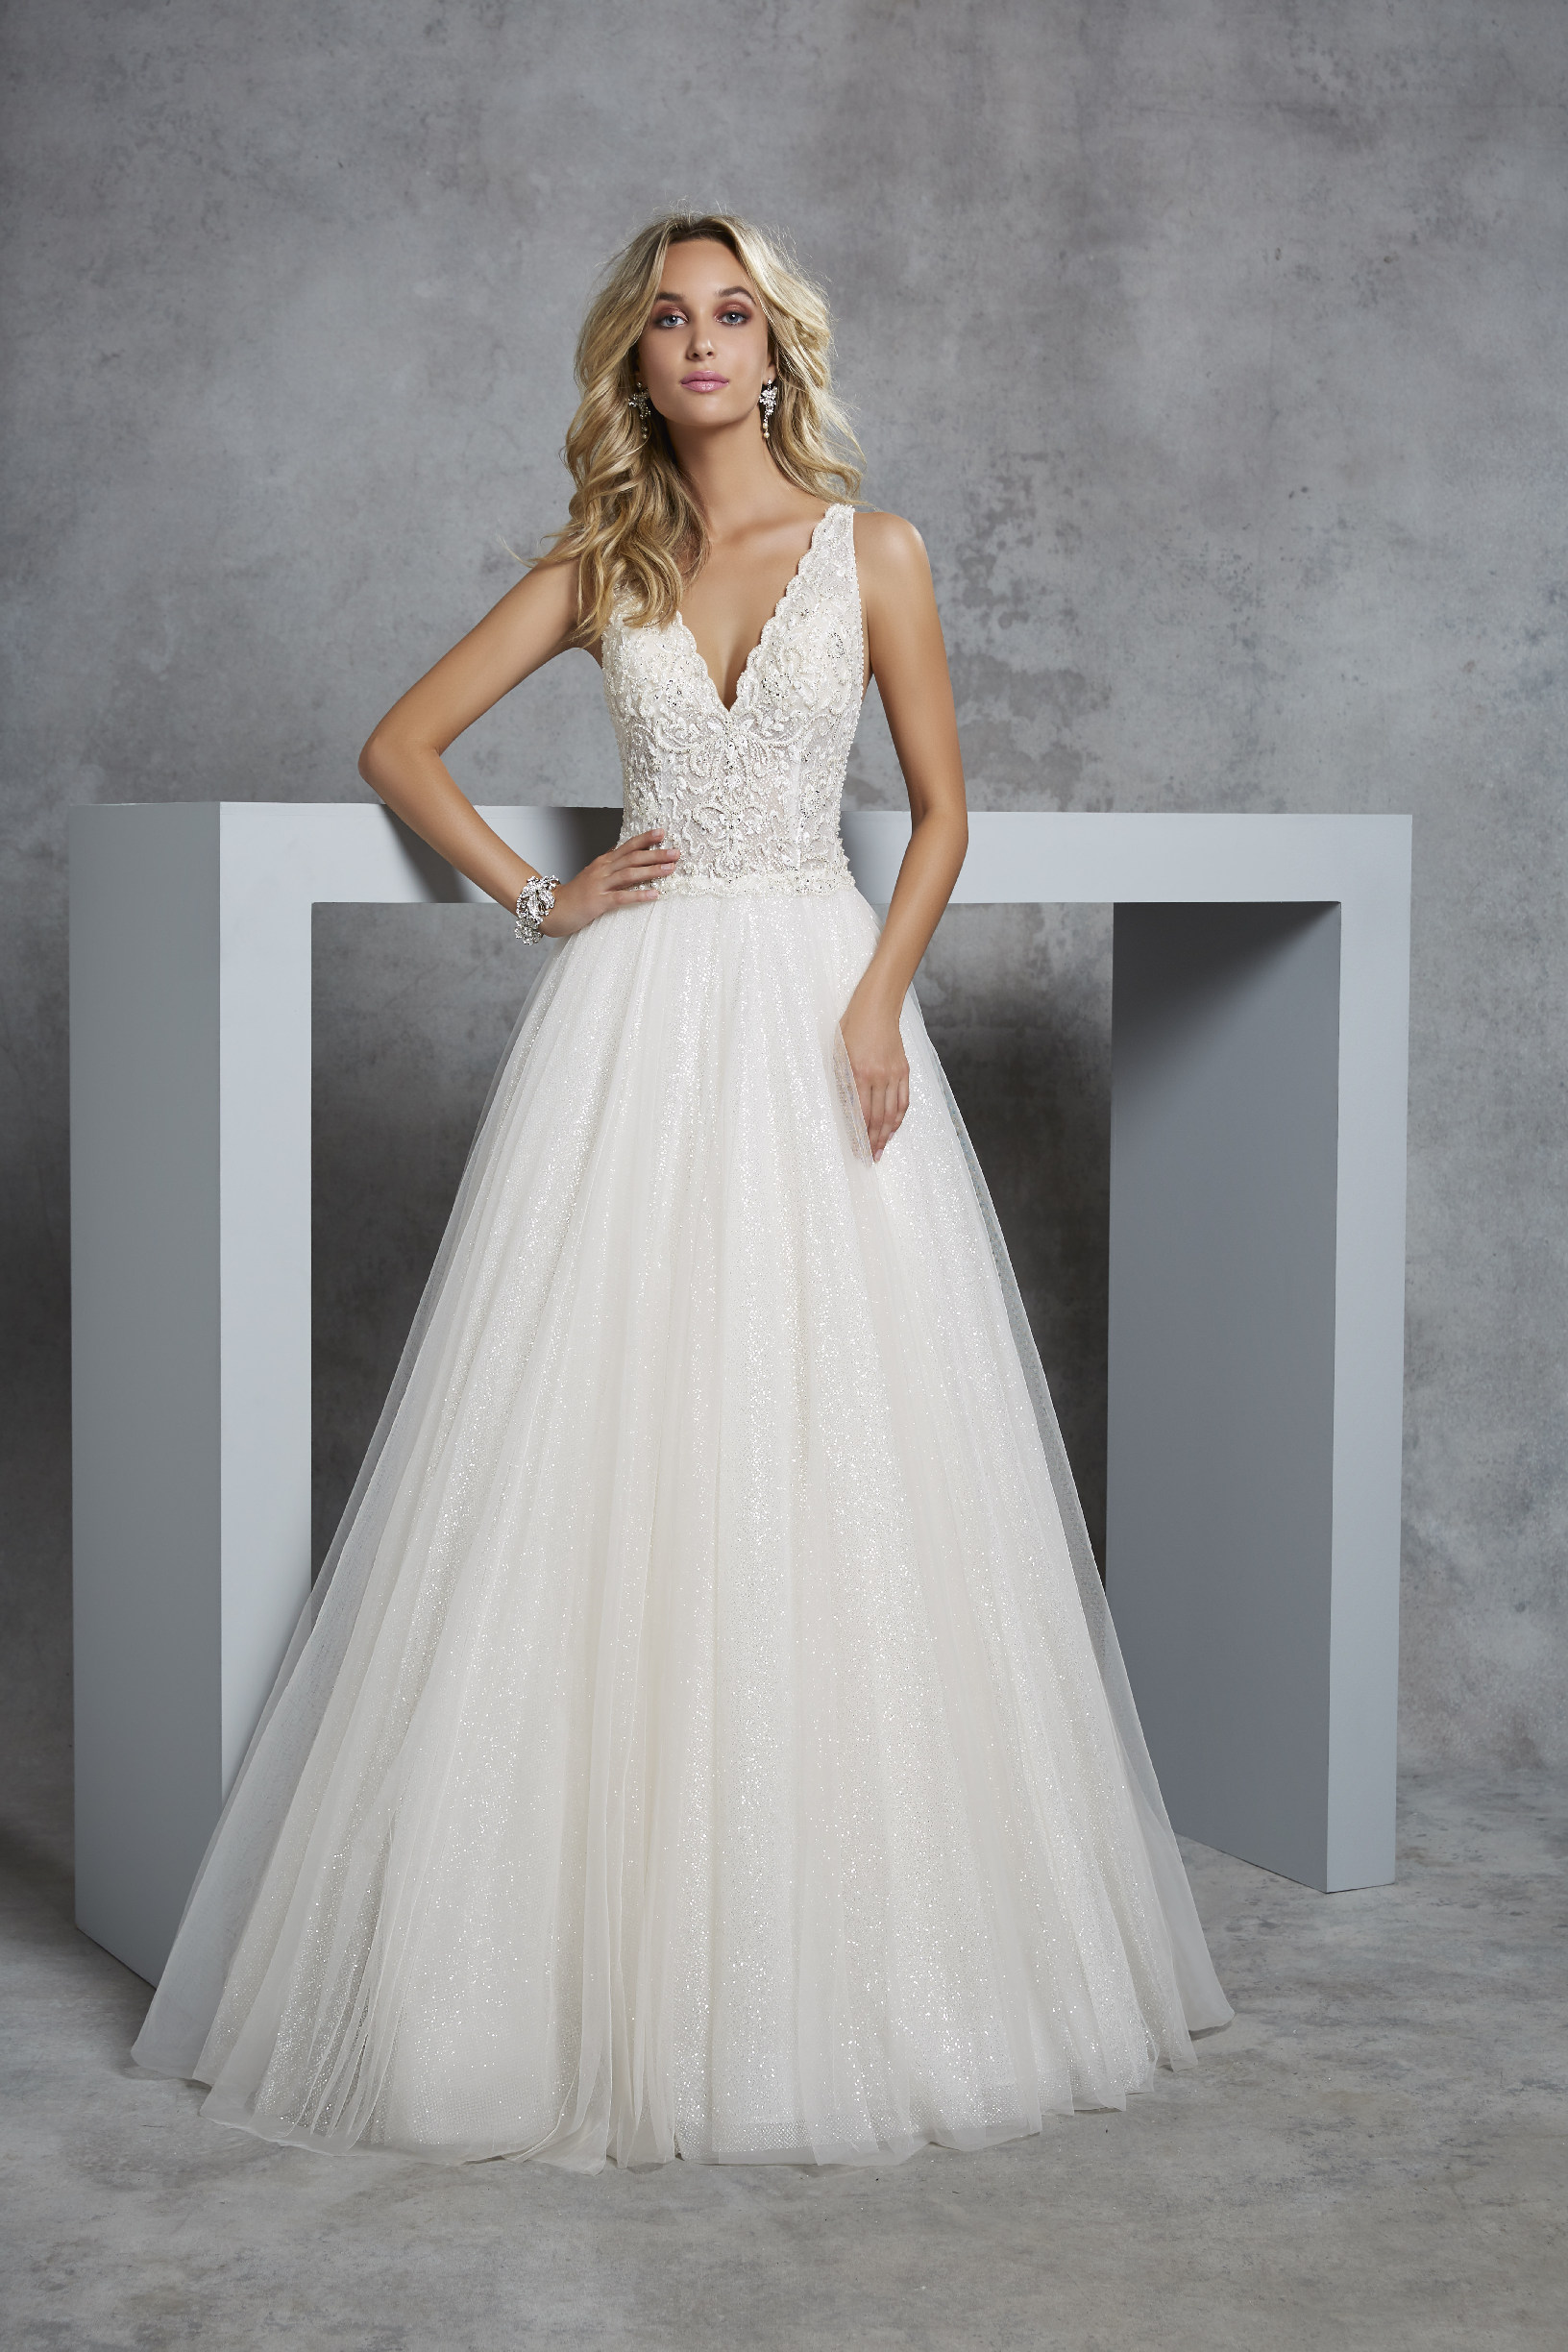 Model wearing Ronald Joyce 69402, an A-line wedding dress silhouette with a scalloped v-neckline, lace bodice and plain glitter tulle skirt.